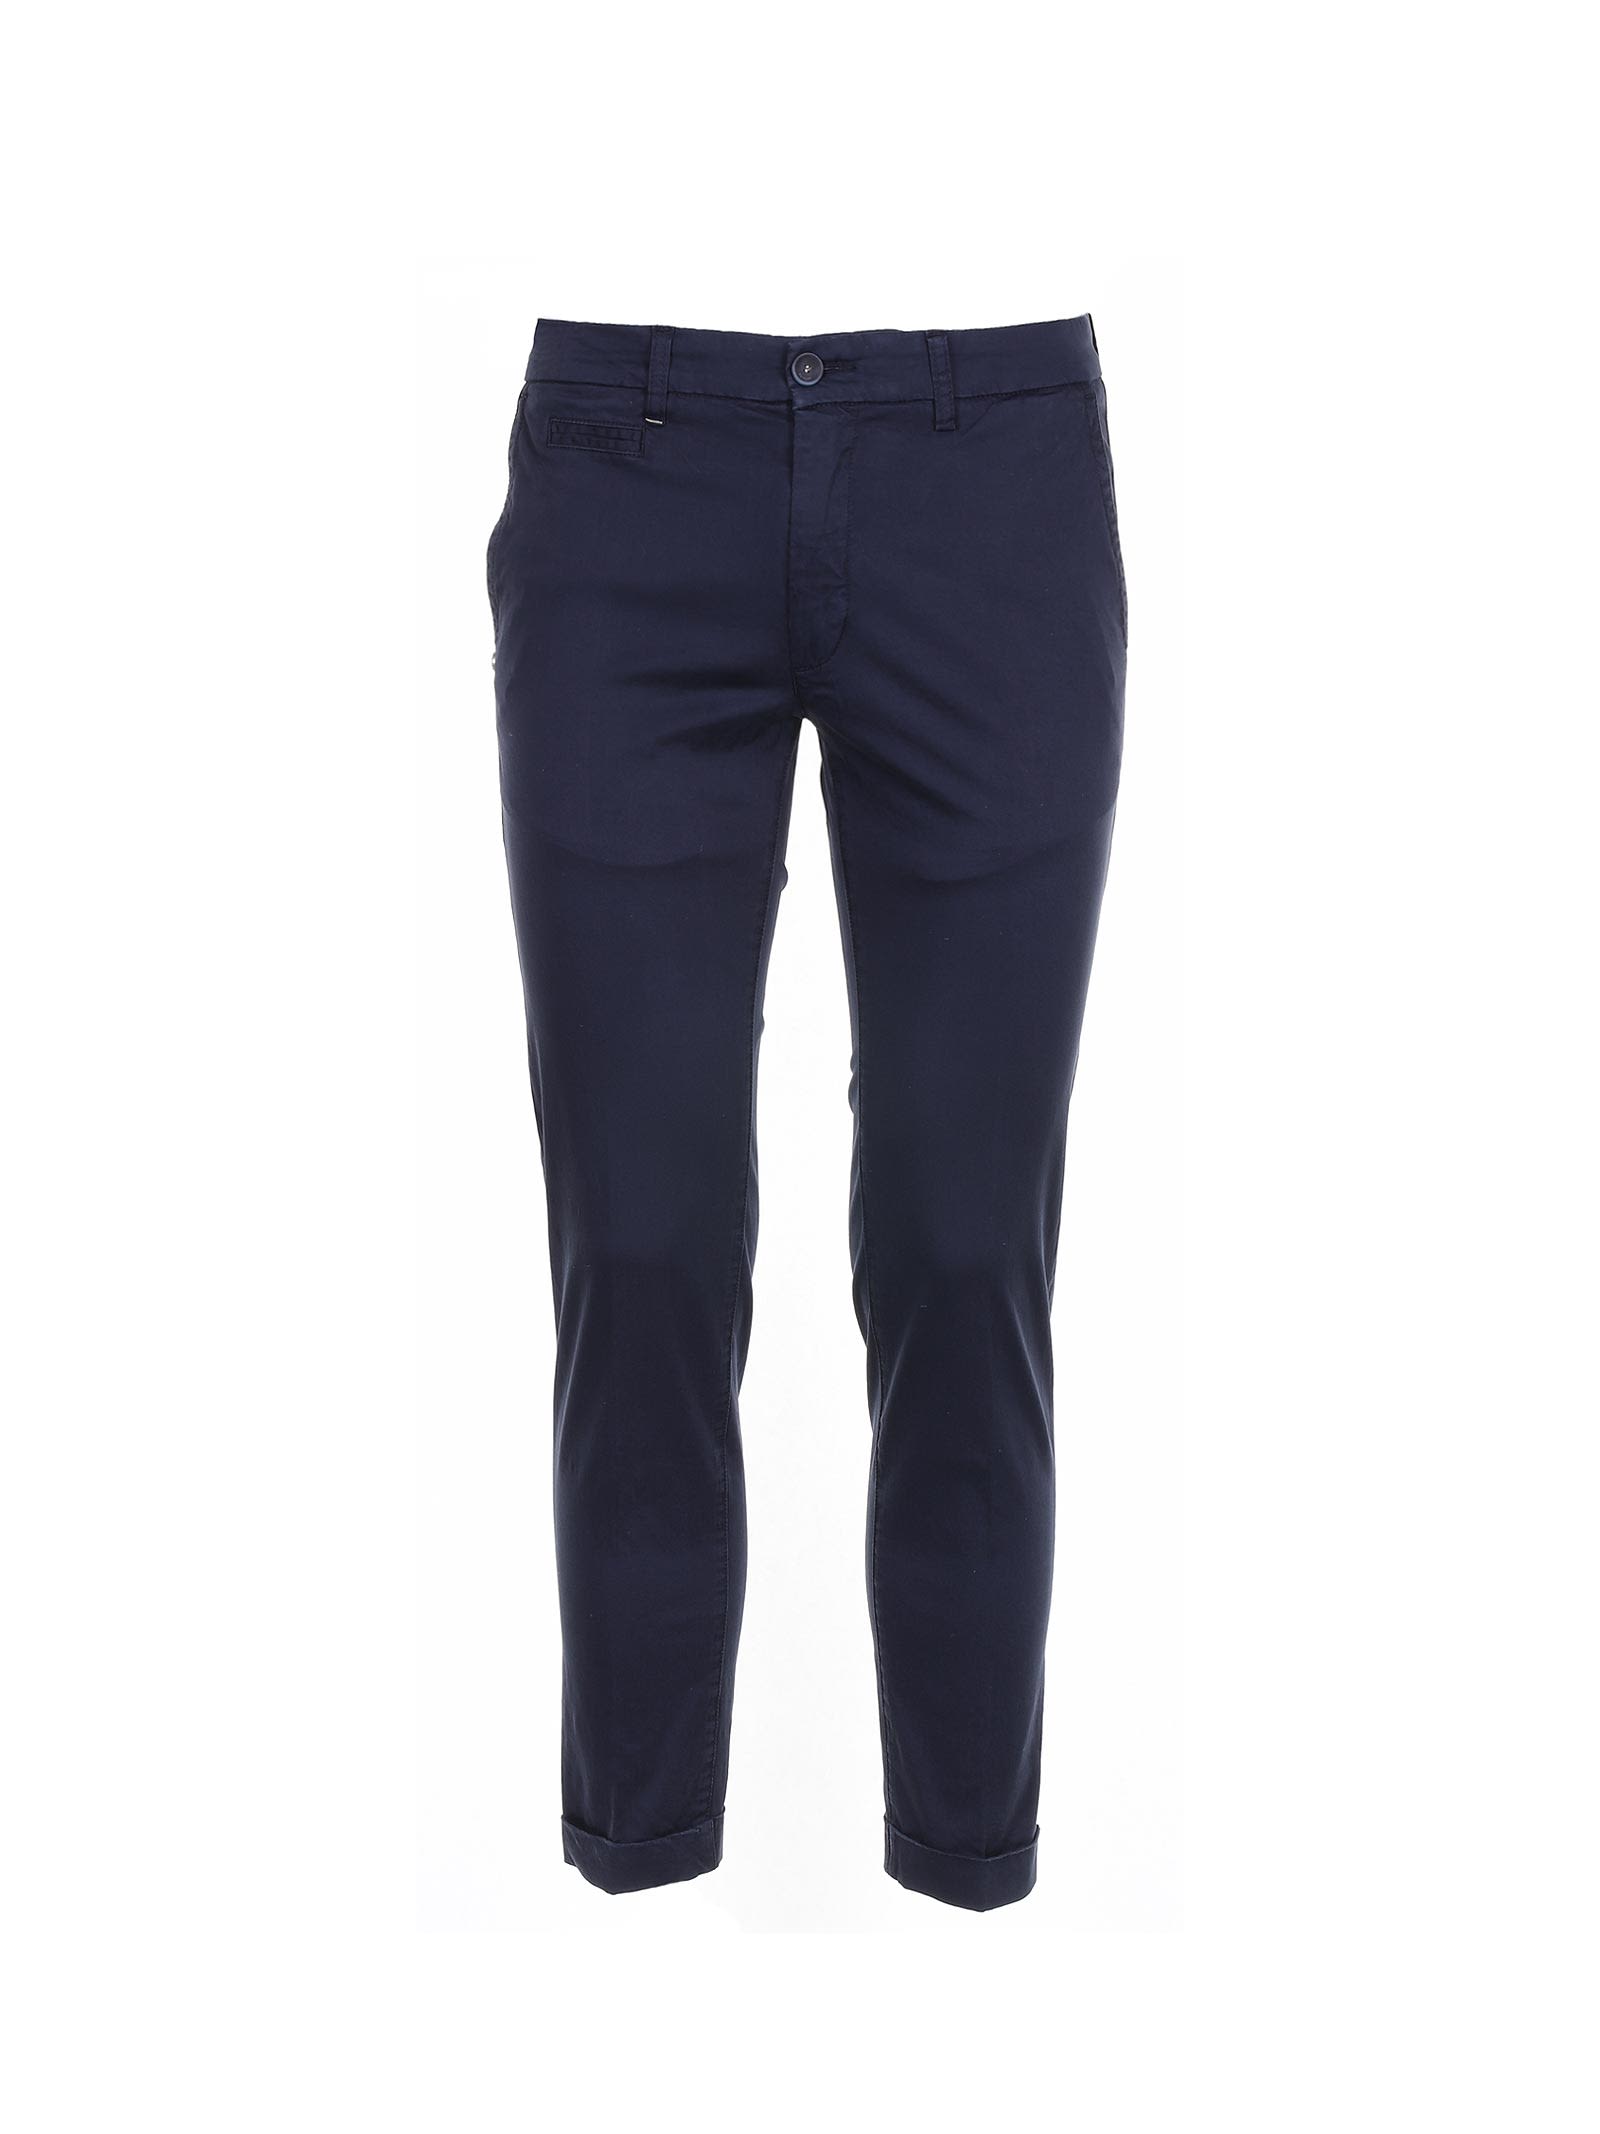 Re-HasH Blue Stretch Satin Trousers